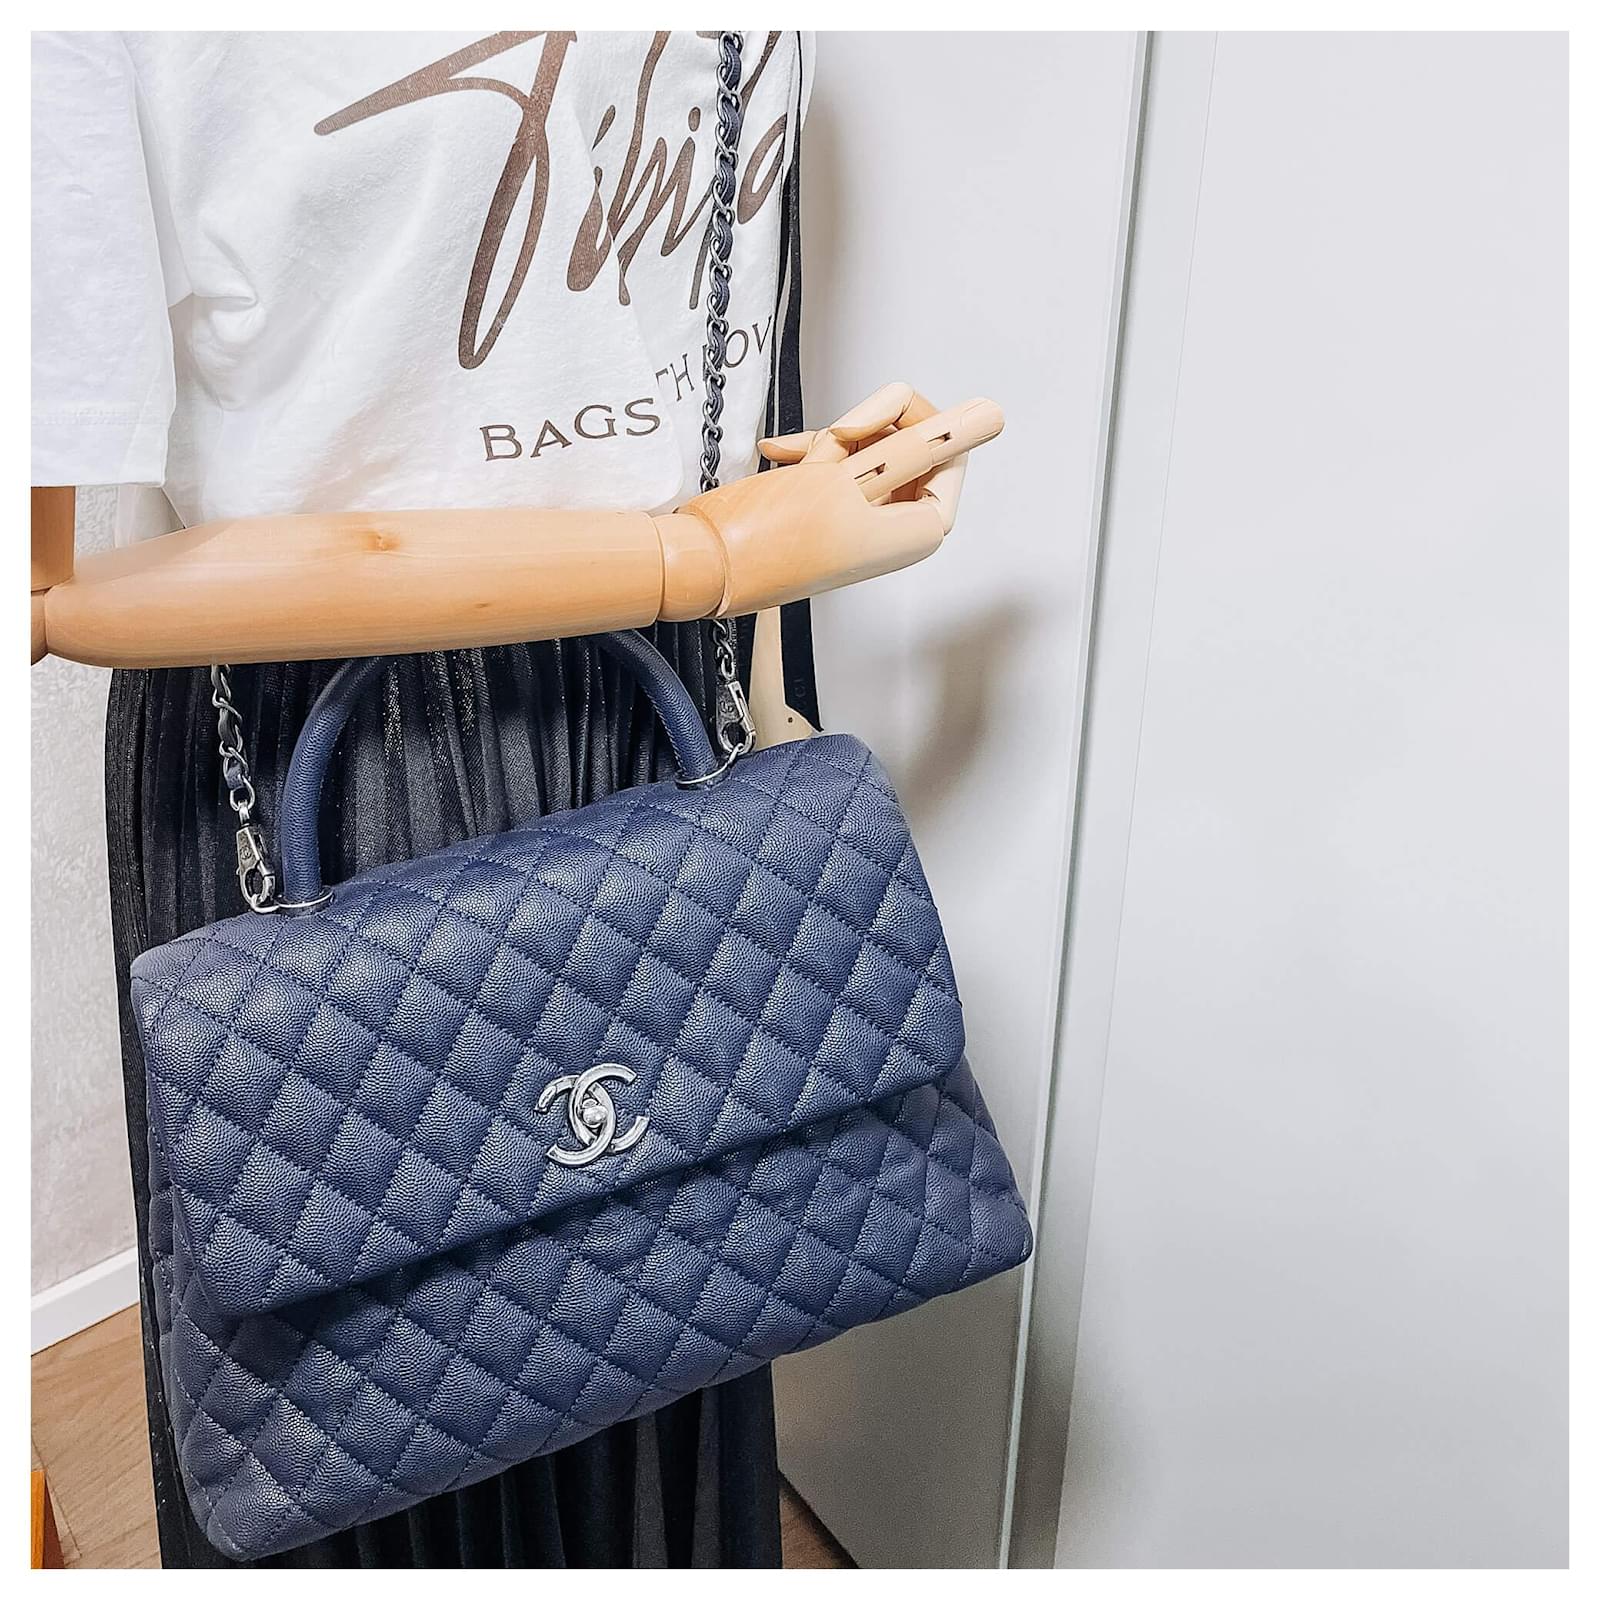 CHANEL, Bags, Chanel Coco Top Handle Bag Quilted Caviar